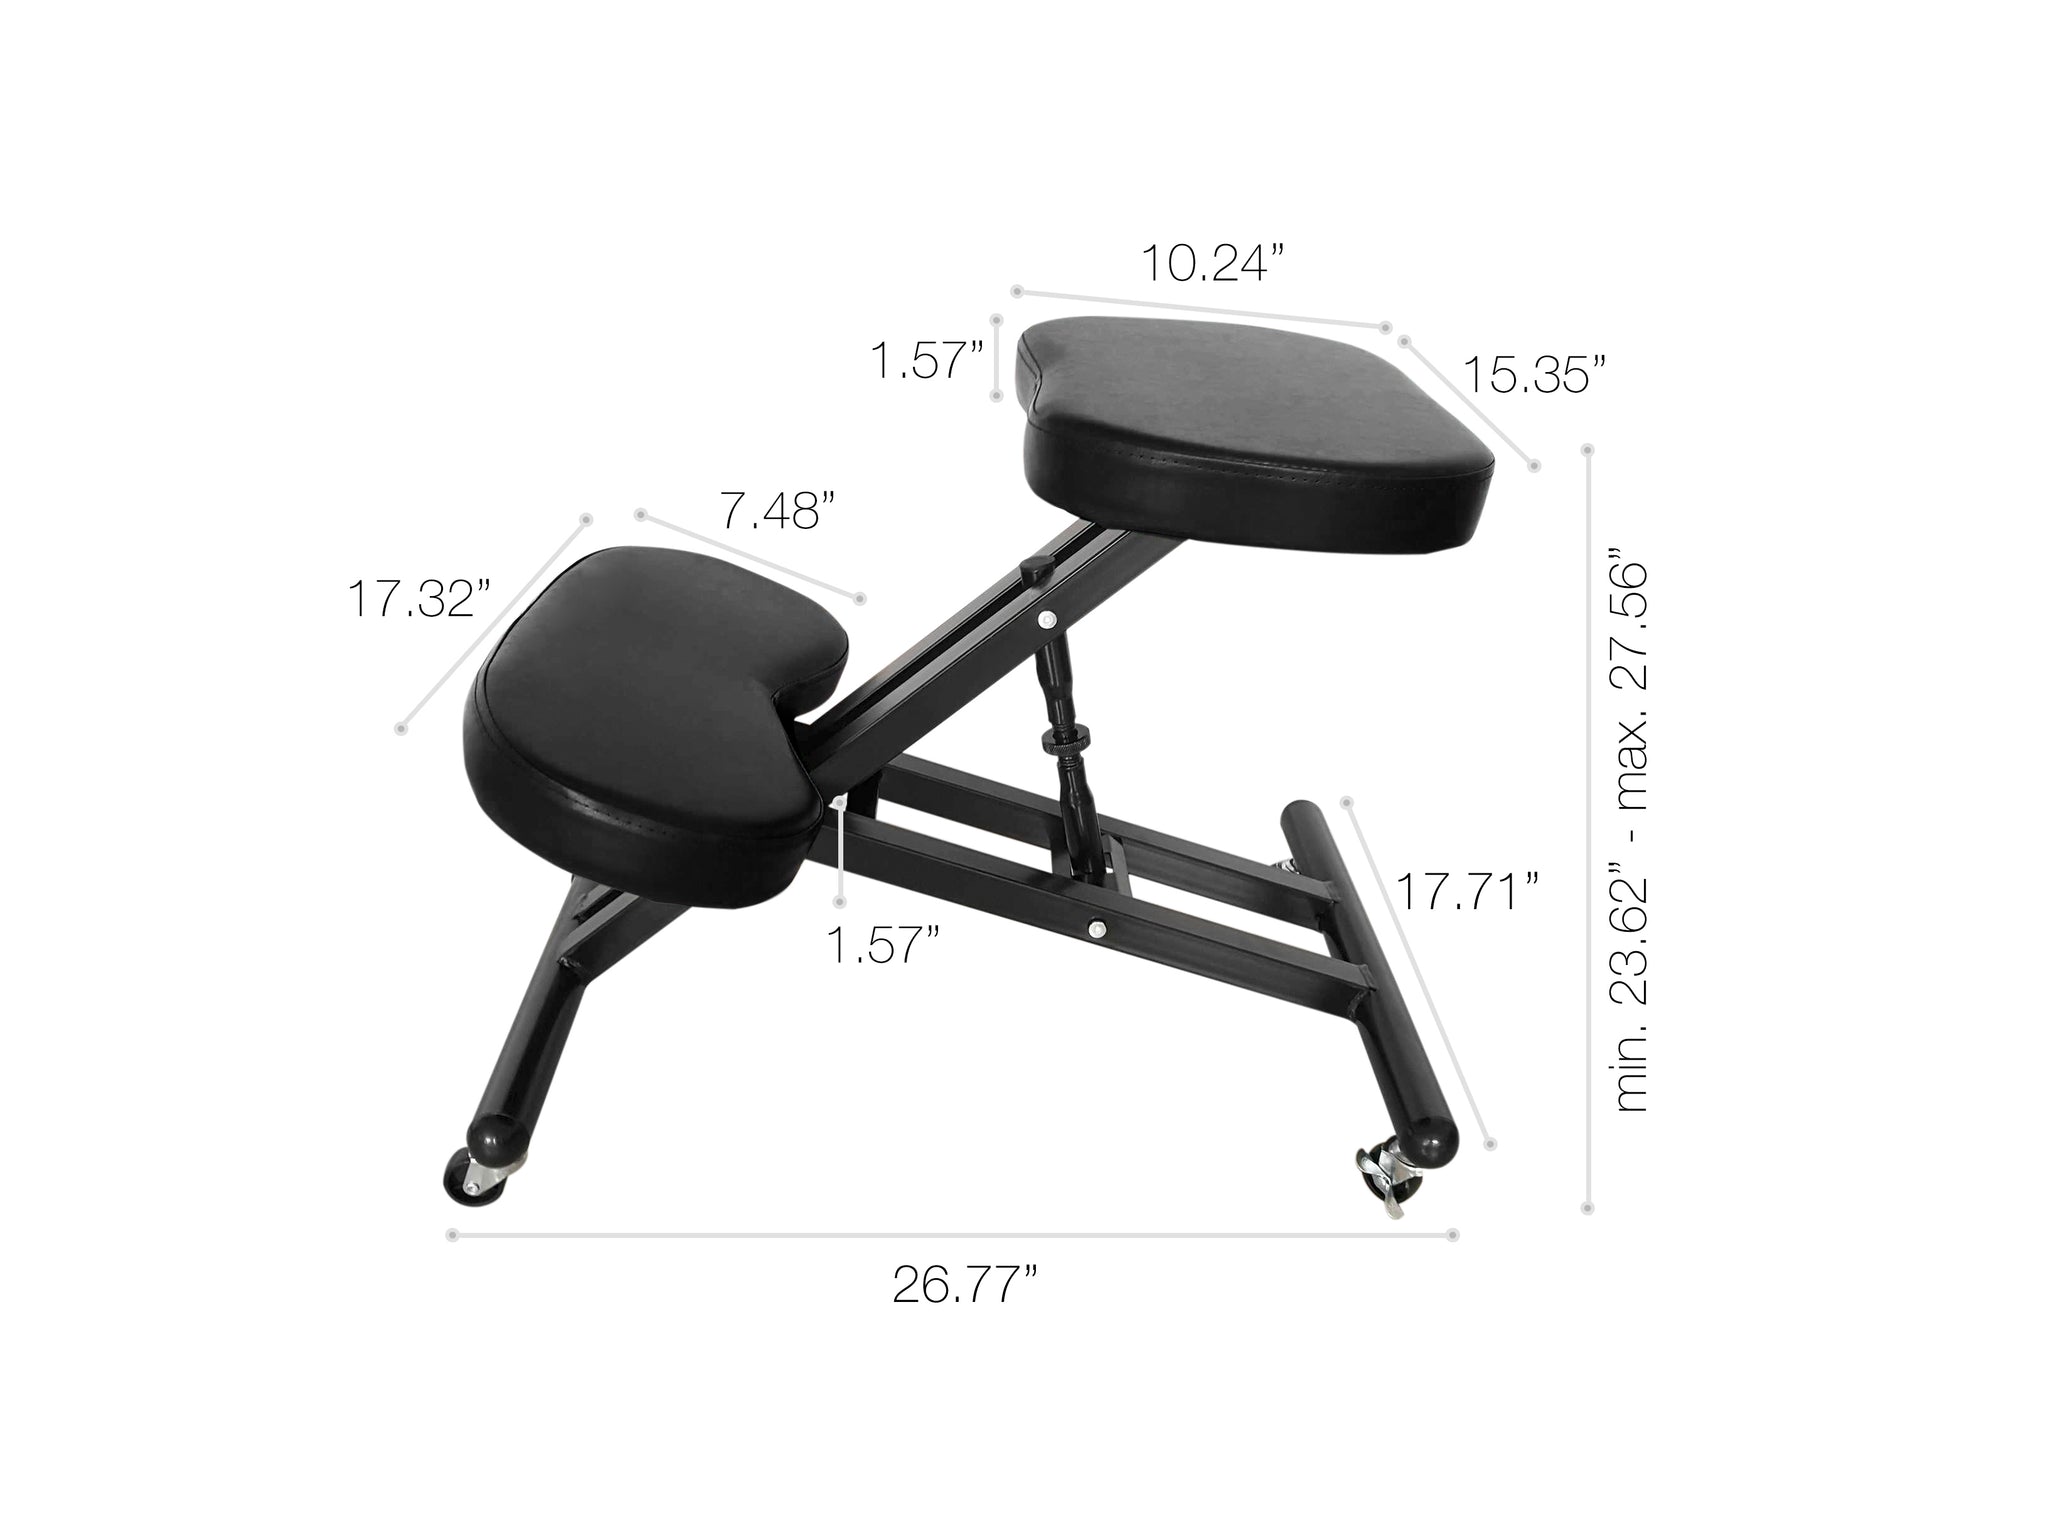 YOOMEMM Balance Chair with Backrest,Kneeling Chair with Casters, Improve  Sitting Posture with Adjustable Height & Angle, YDM-1458-2D